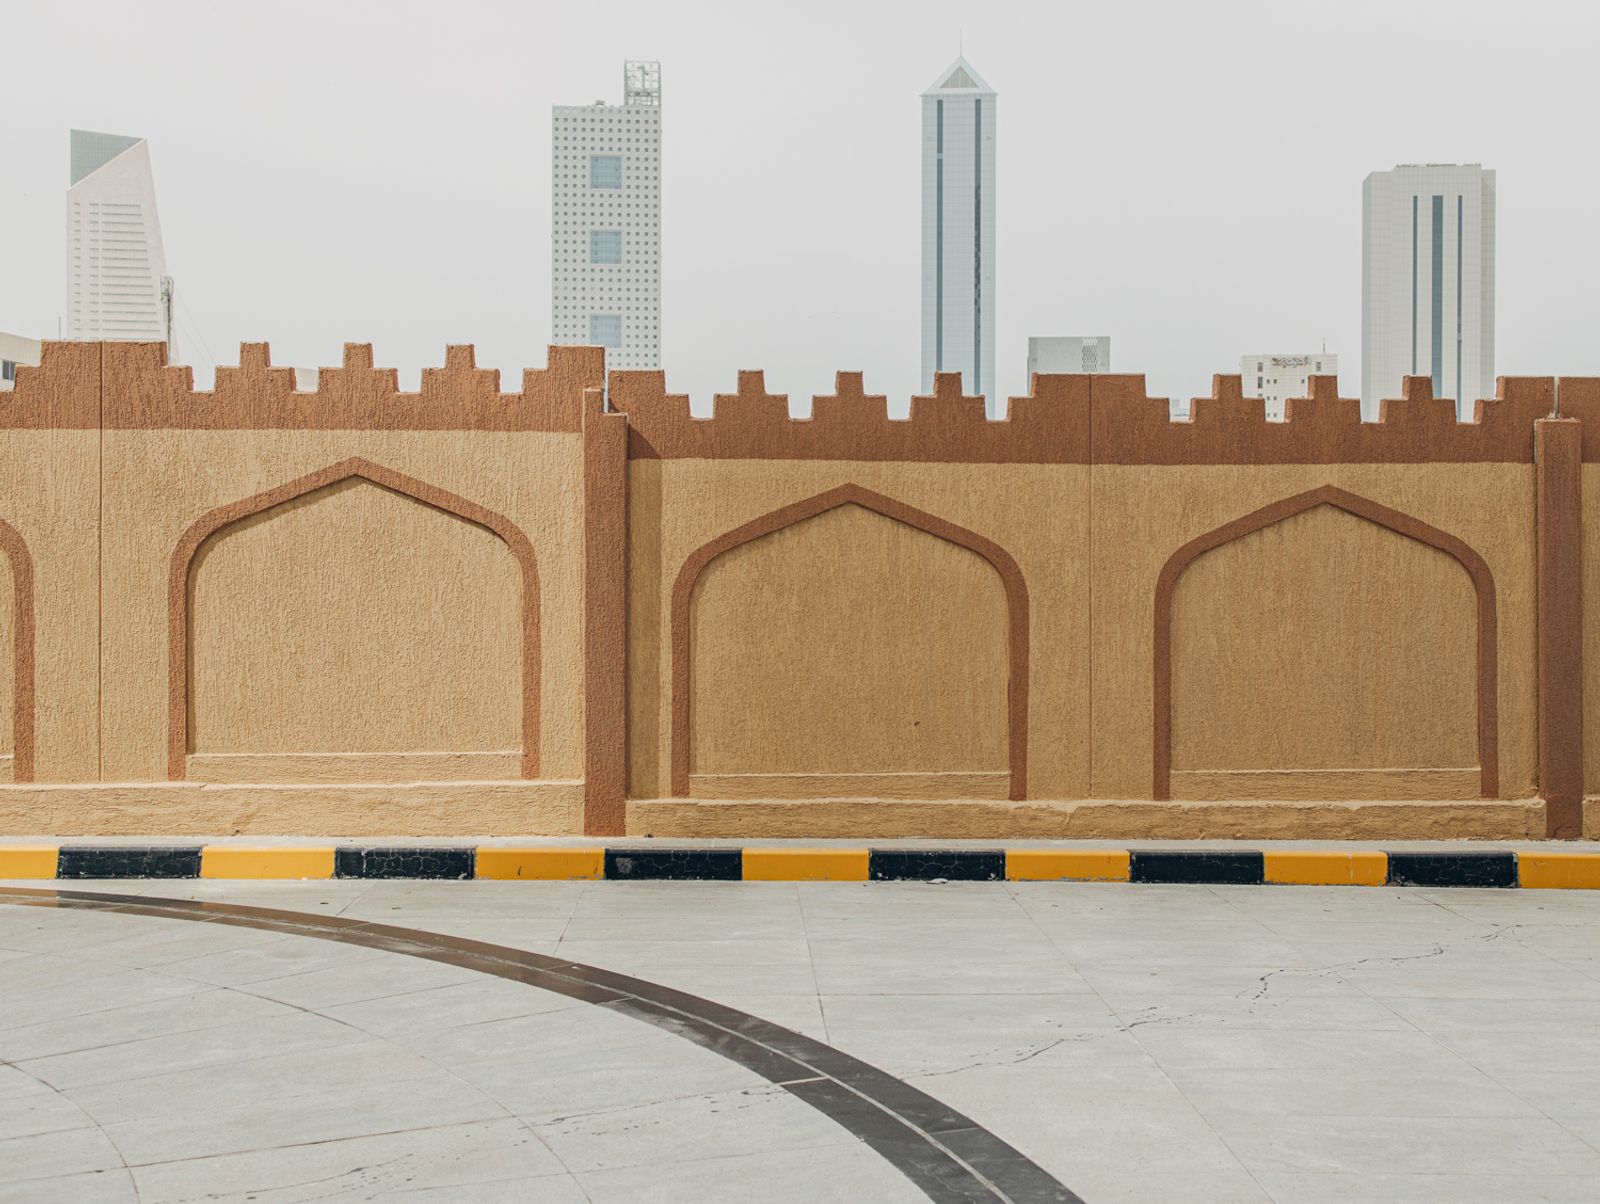 © Gabriele Cecconi - Image from the TiàWùK (Kuwait at reverse) photography project